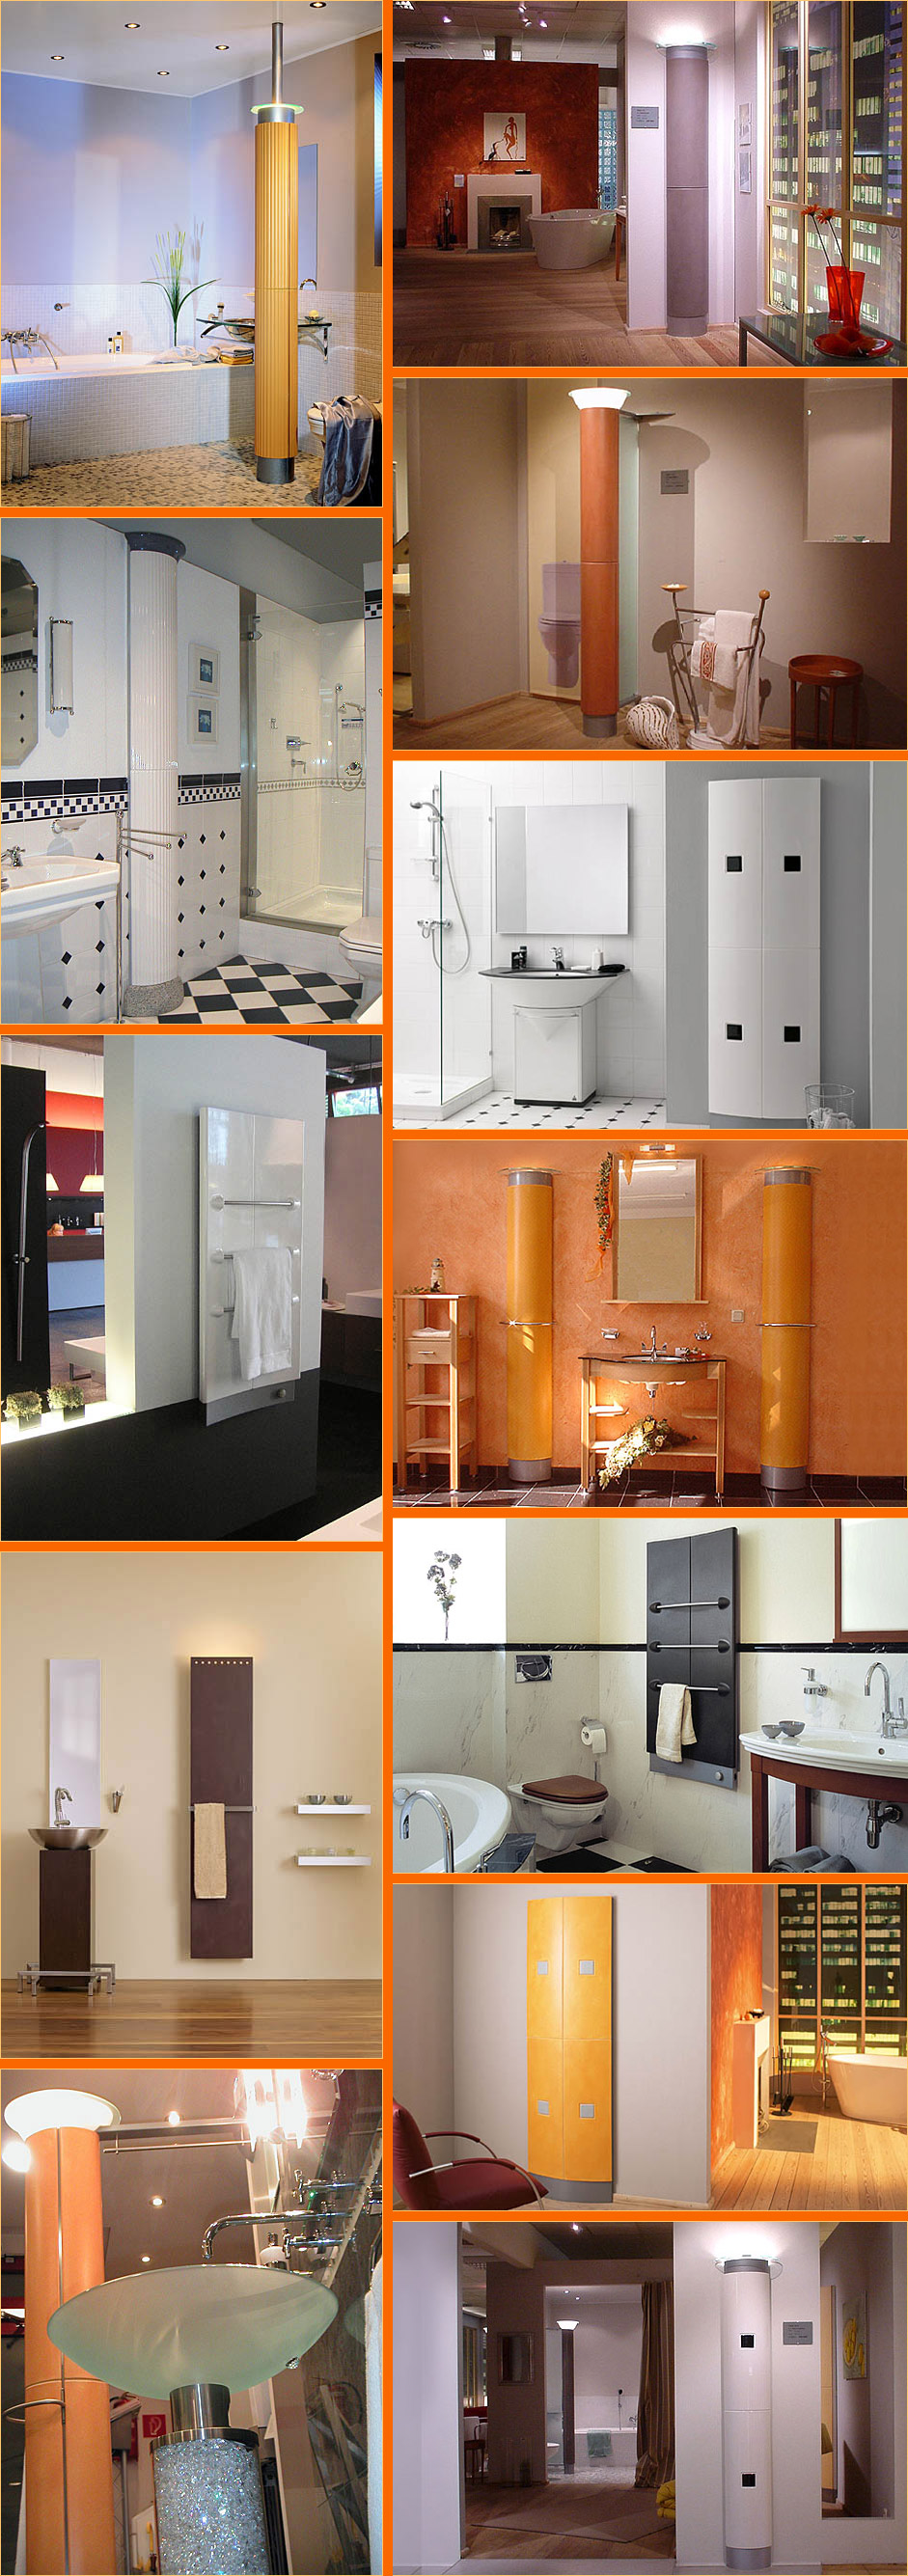 CERAMIC RADIATORS - VARIETY OF SHAPES AND COLOURS